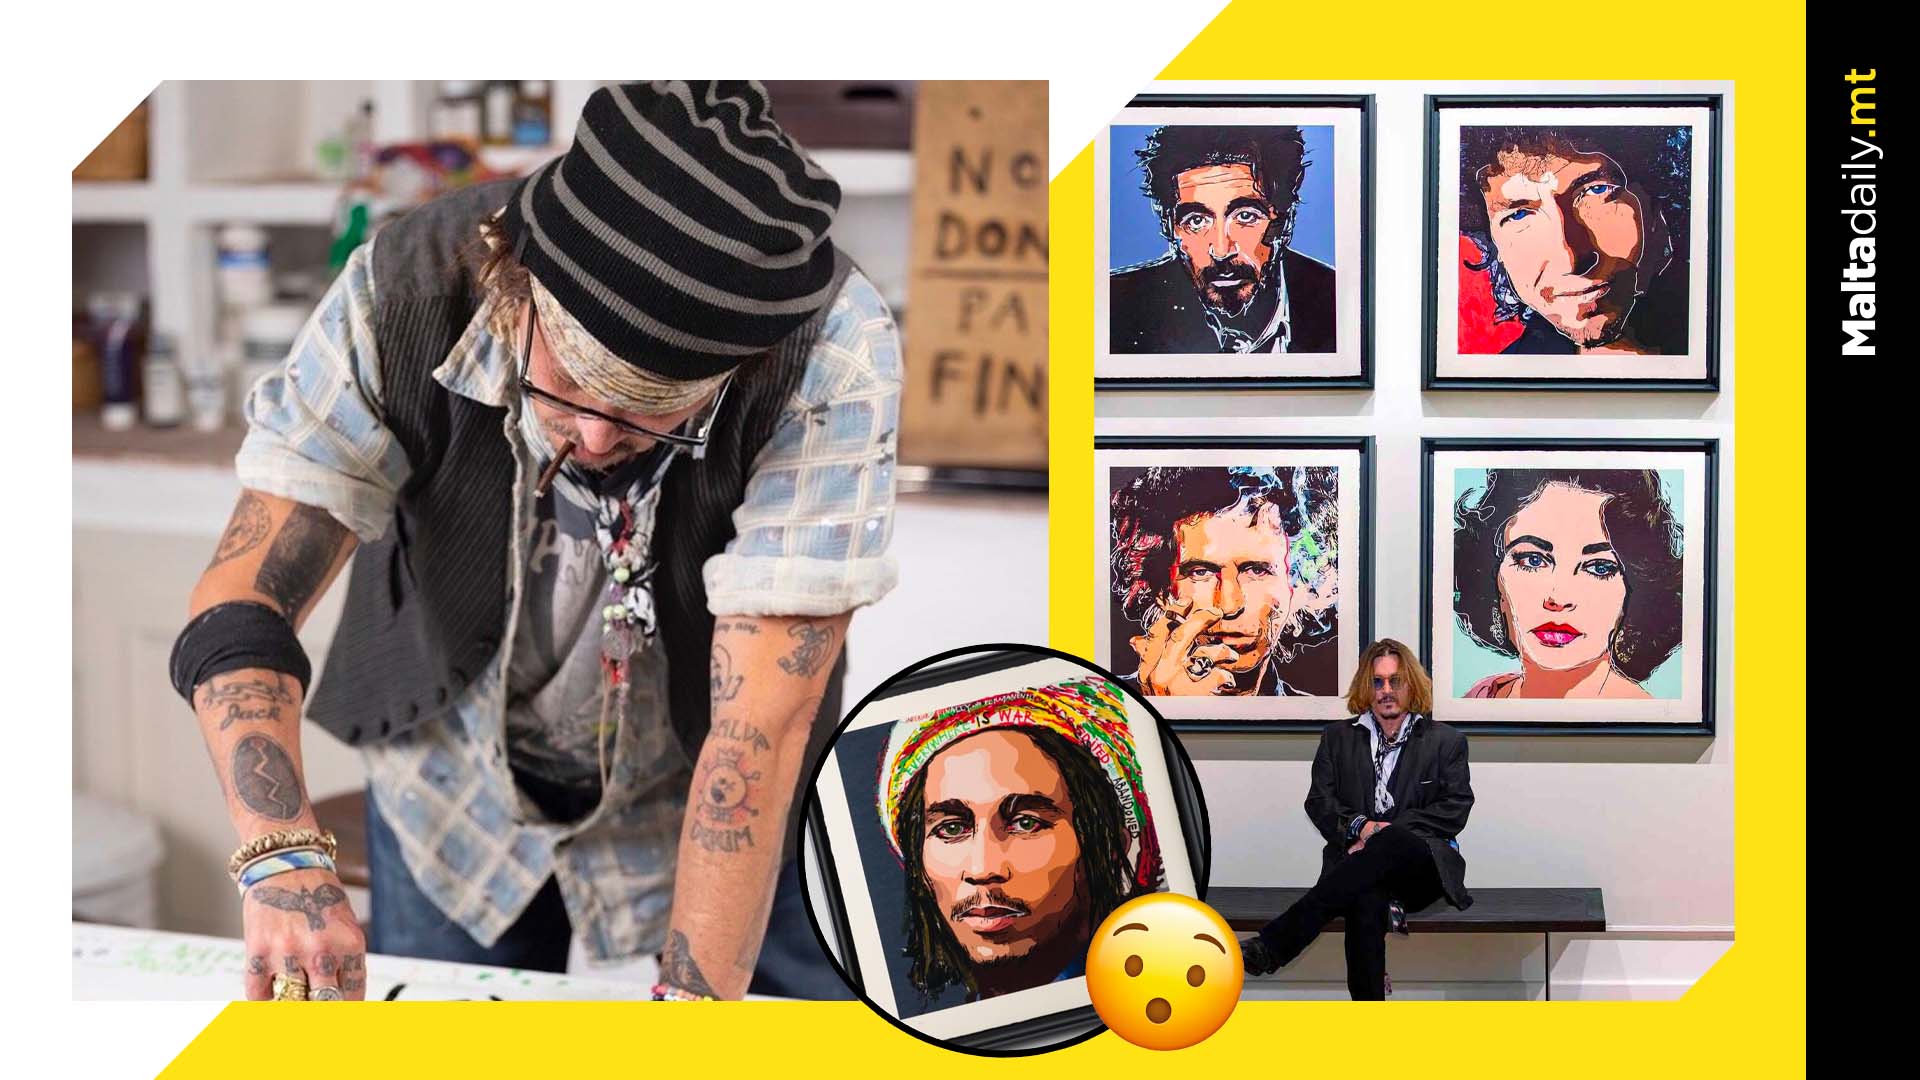 Johnny Depp is making a fortune selling his paintings of celebrities